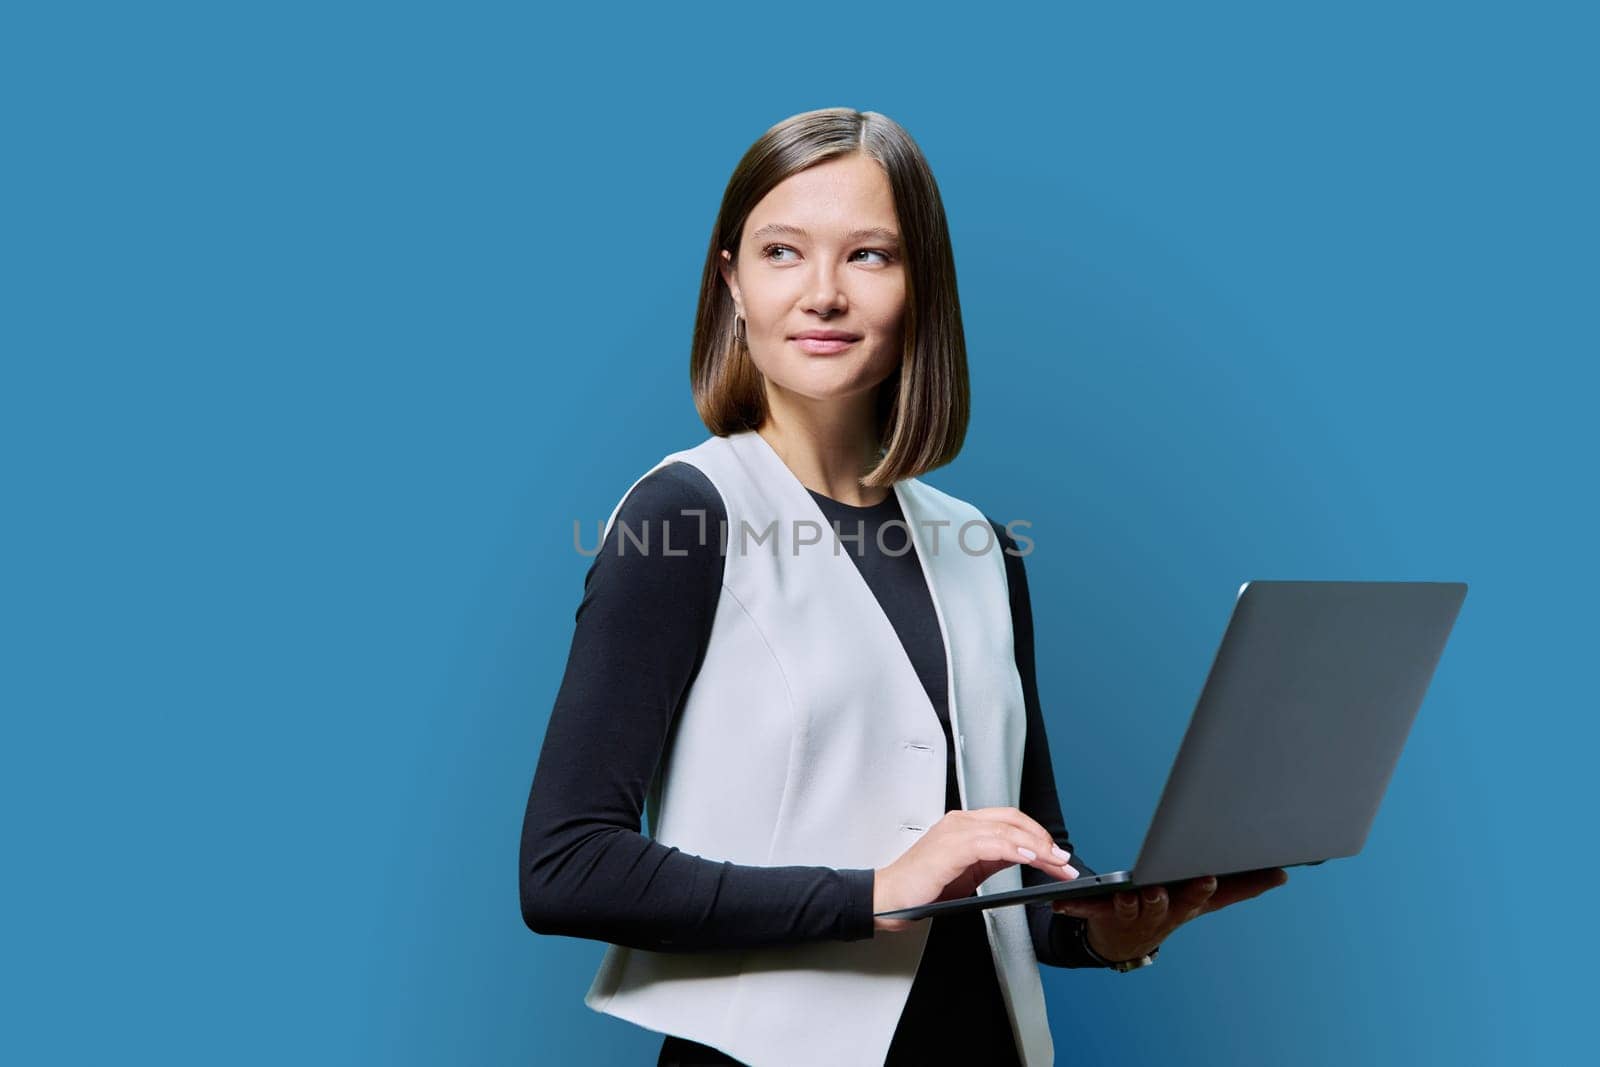 Young woman using laptop computer on blue studio background. Serious female looking to side. Technologies in work business study leisure communication, online Internet applications, lifestyle people